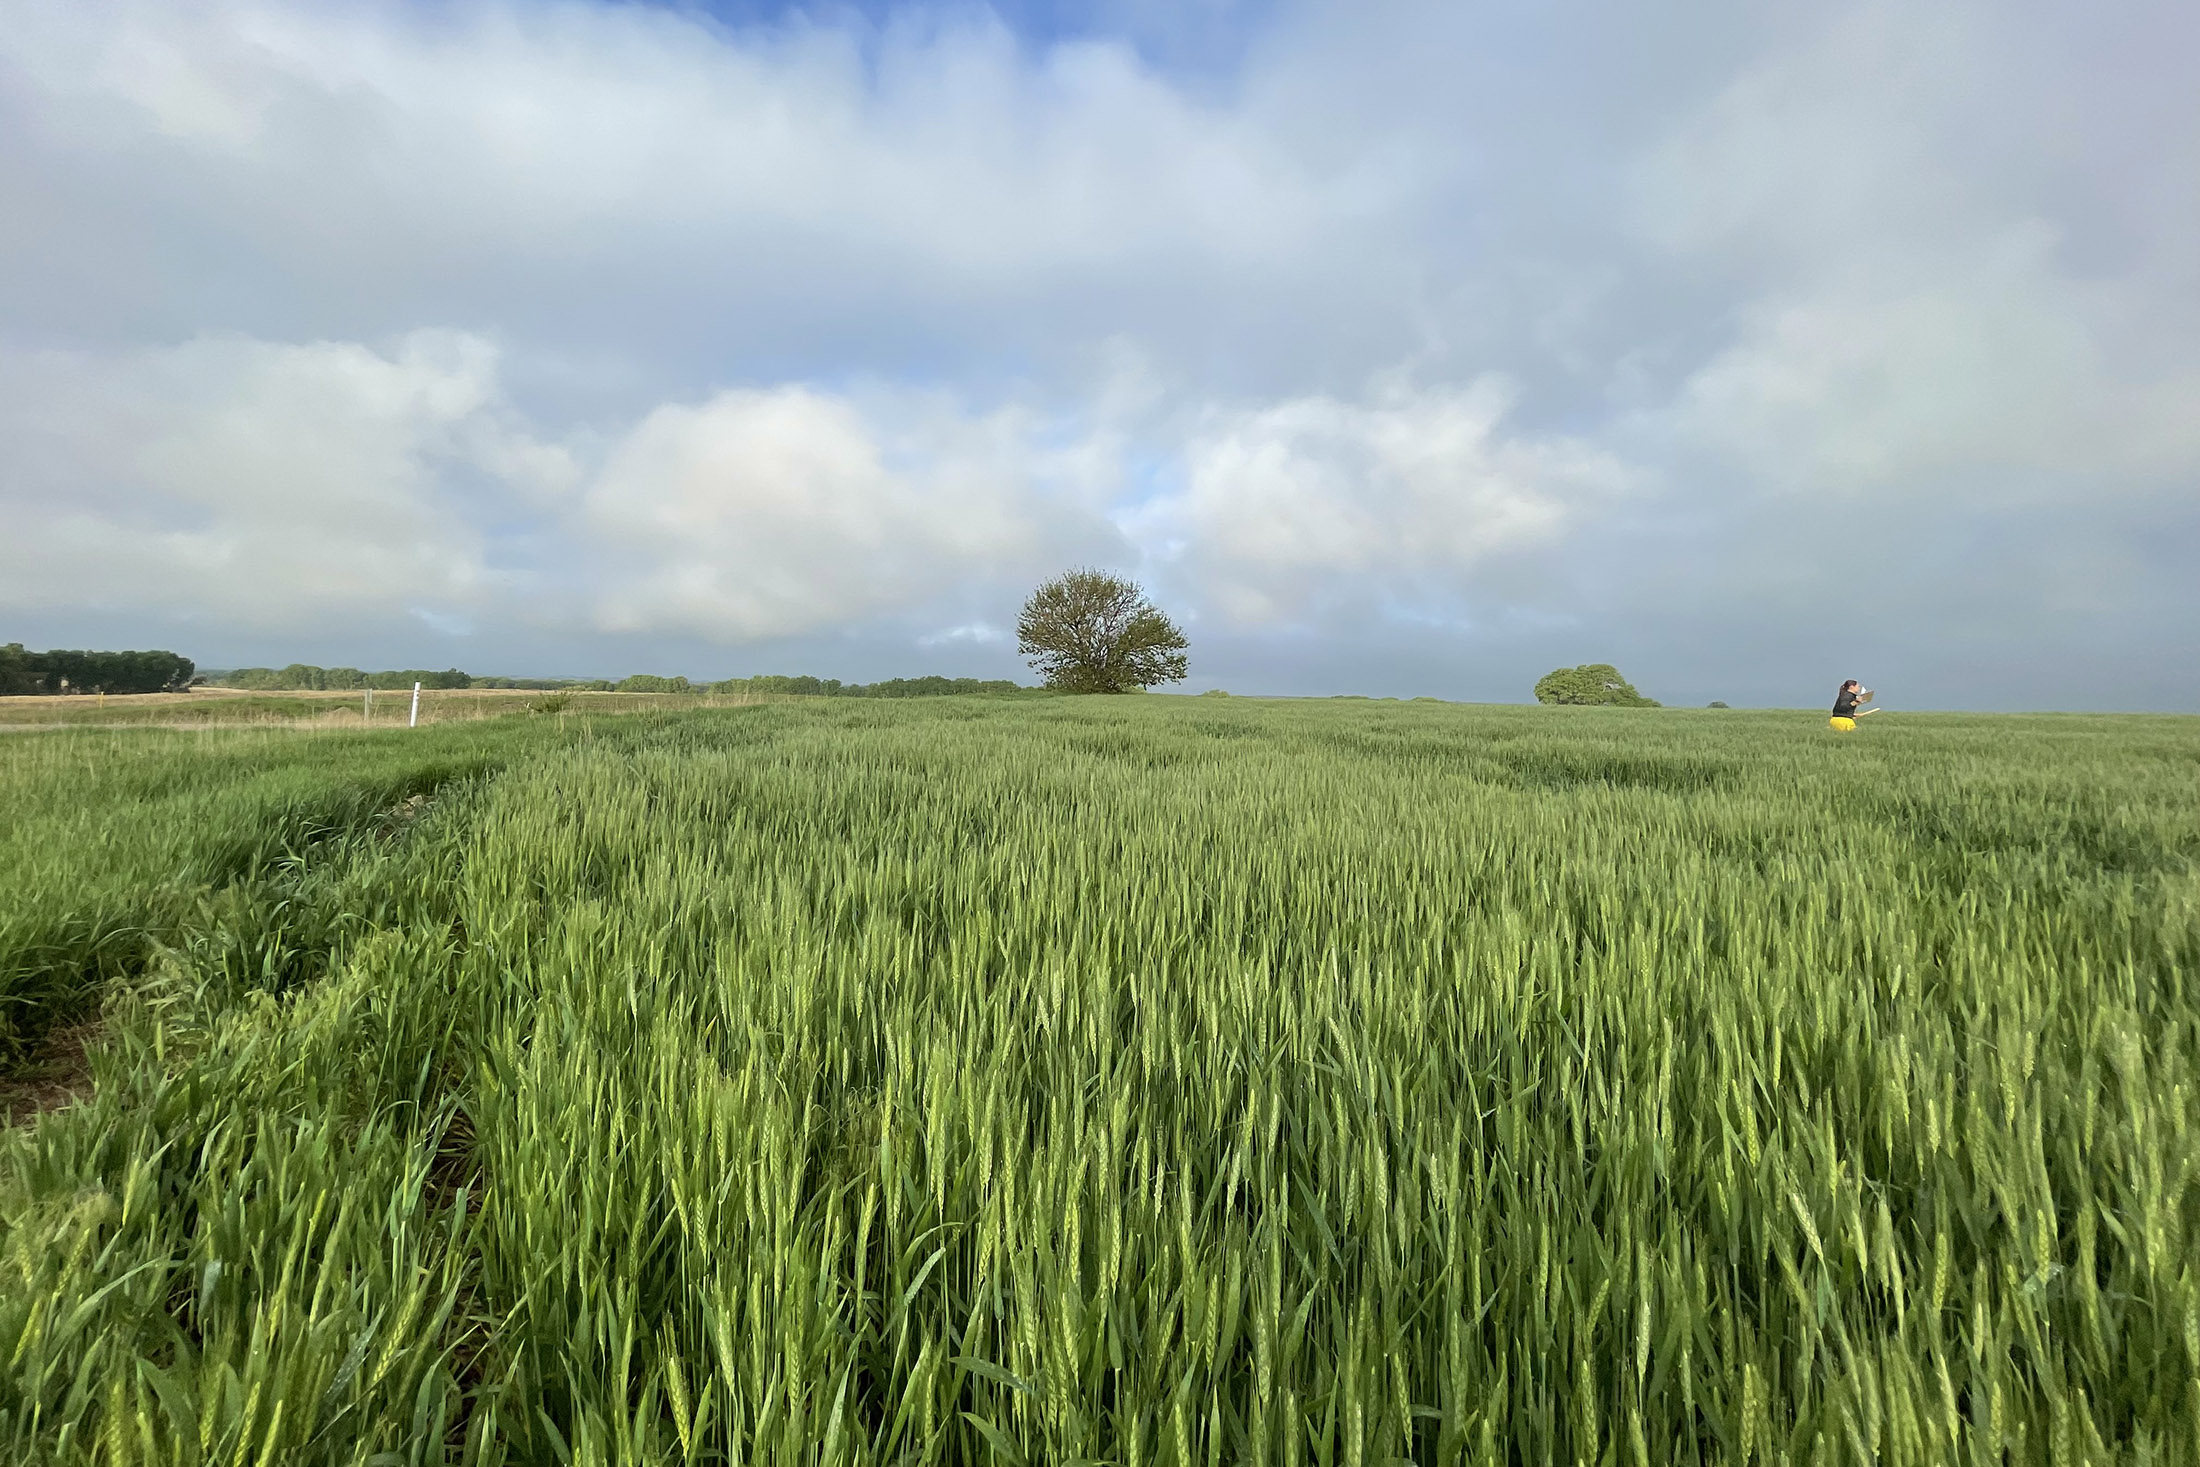 Possible Bumper Wheat Crop Raises Quality Concerns in Kansas Bloomberg